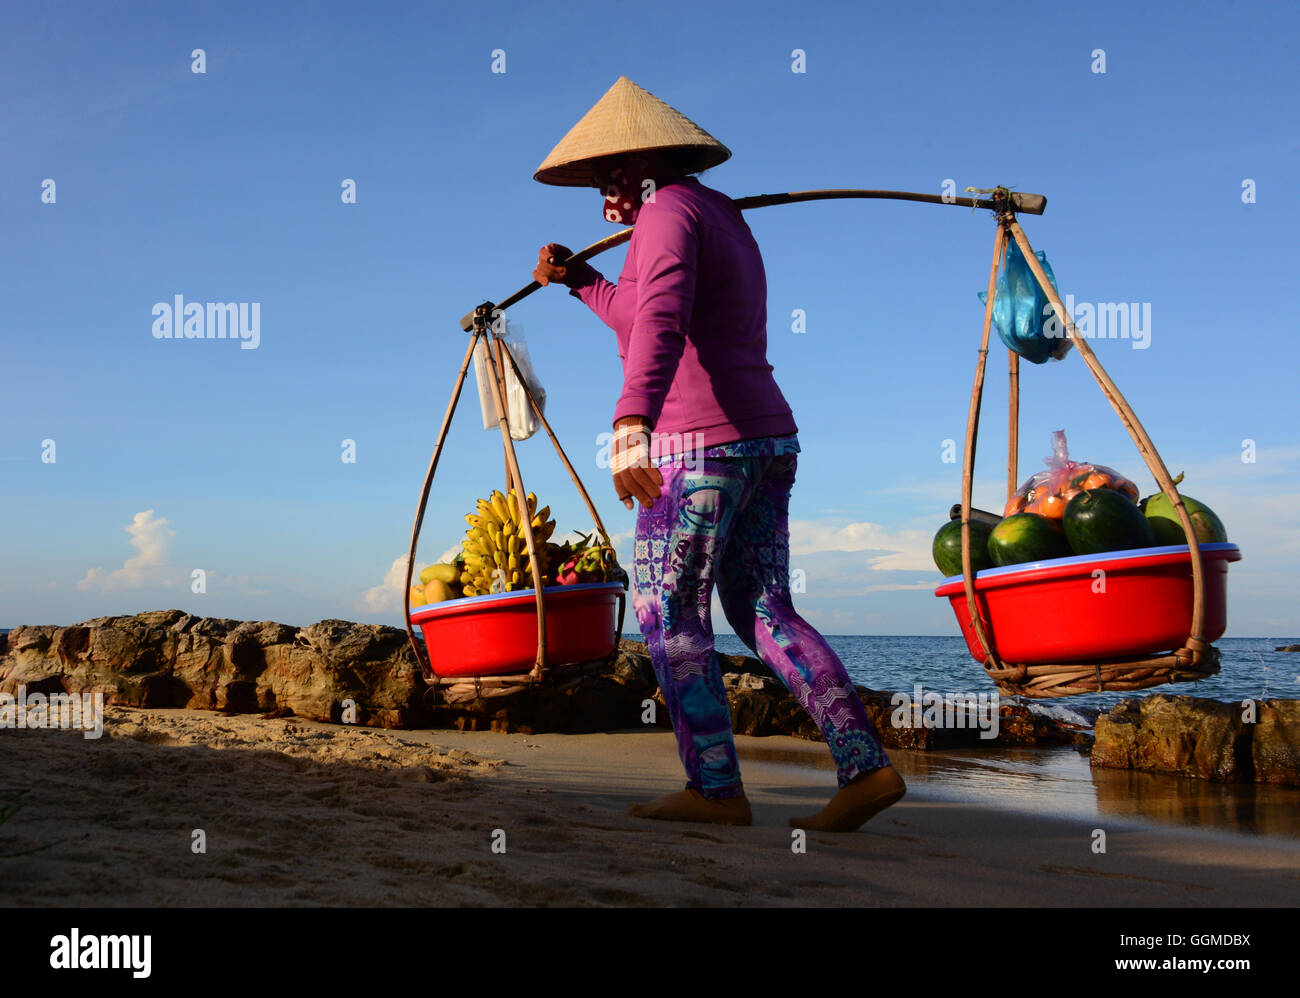 Woman carrying friut, Longbeach on the island of Phu Quoc, Vietnam, Asia Stock Photo